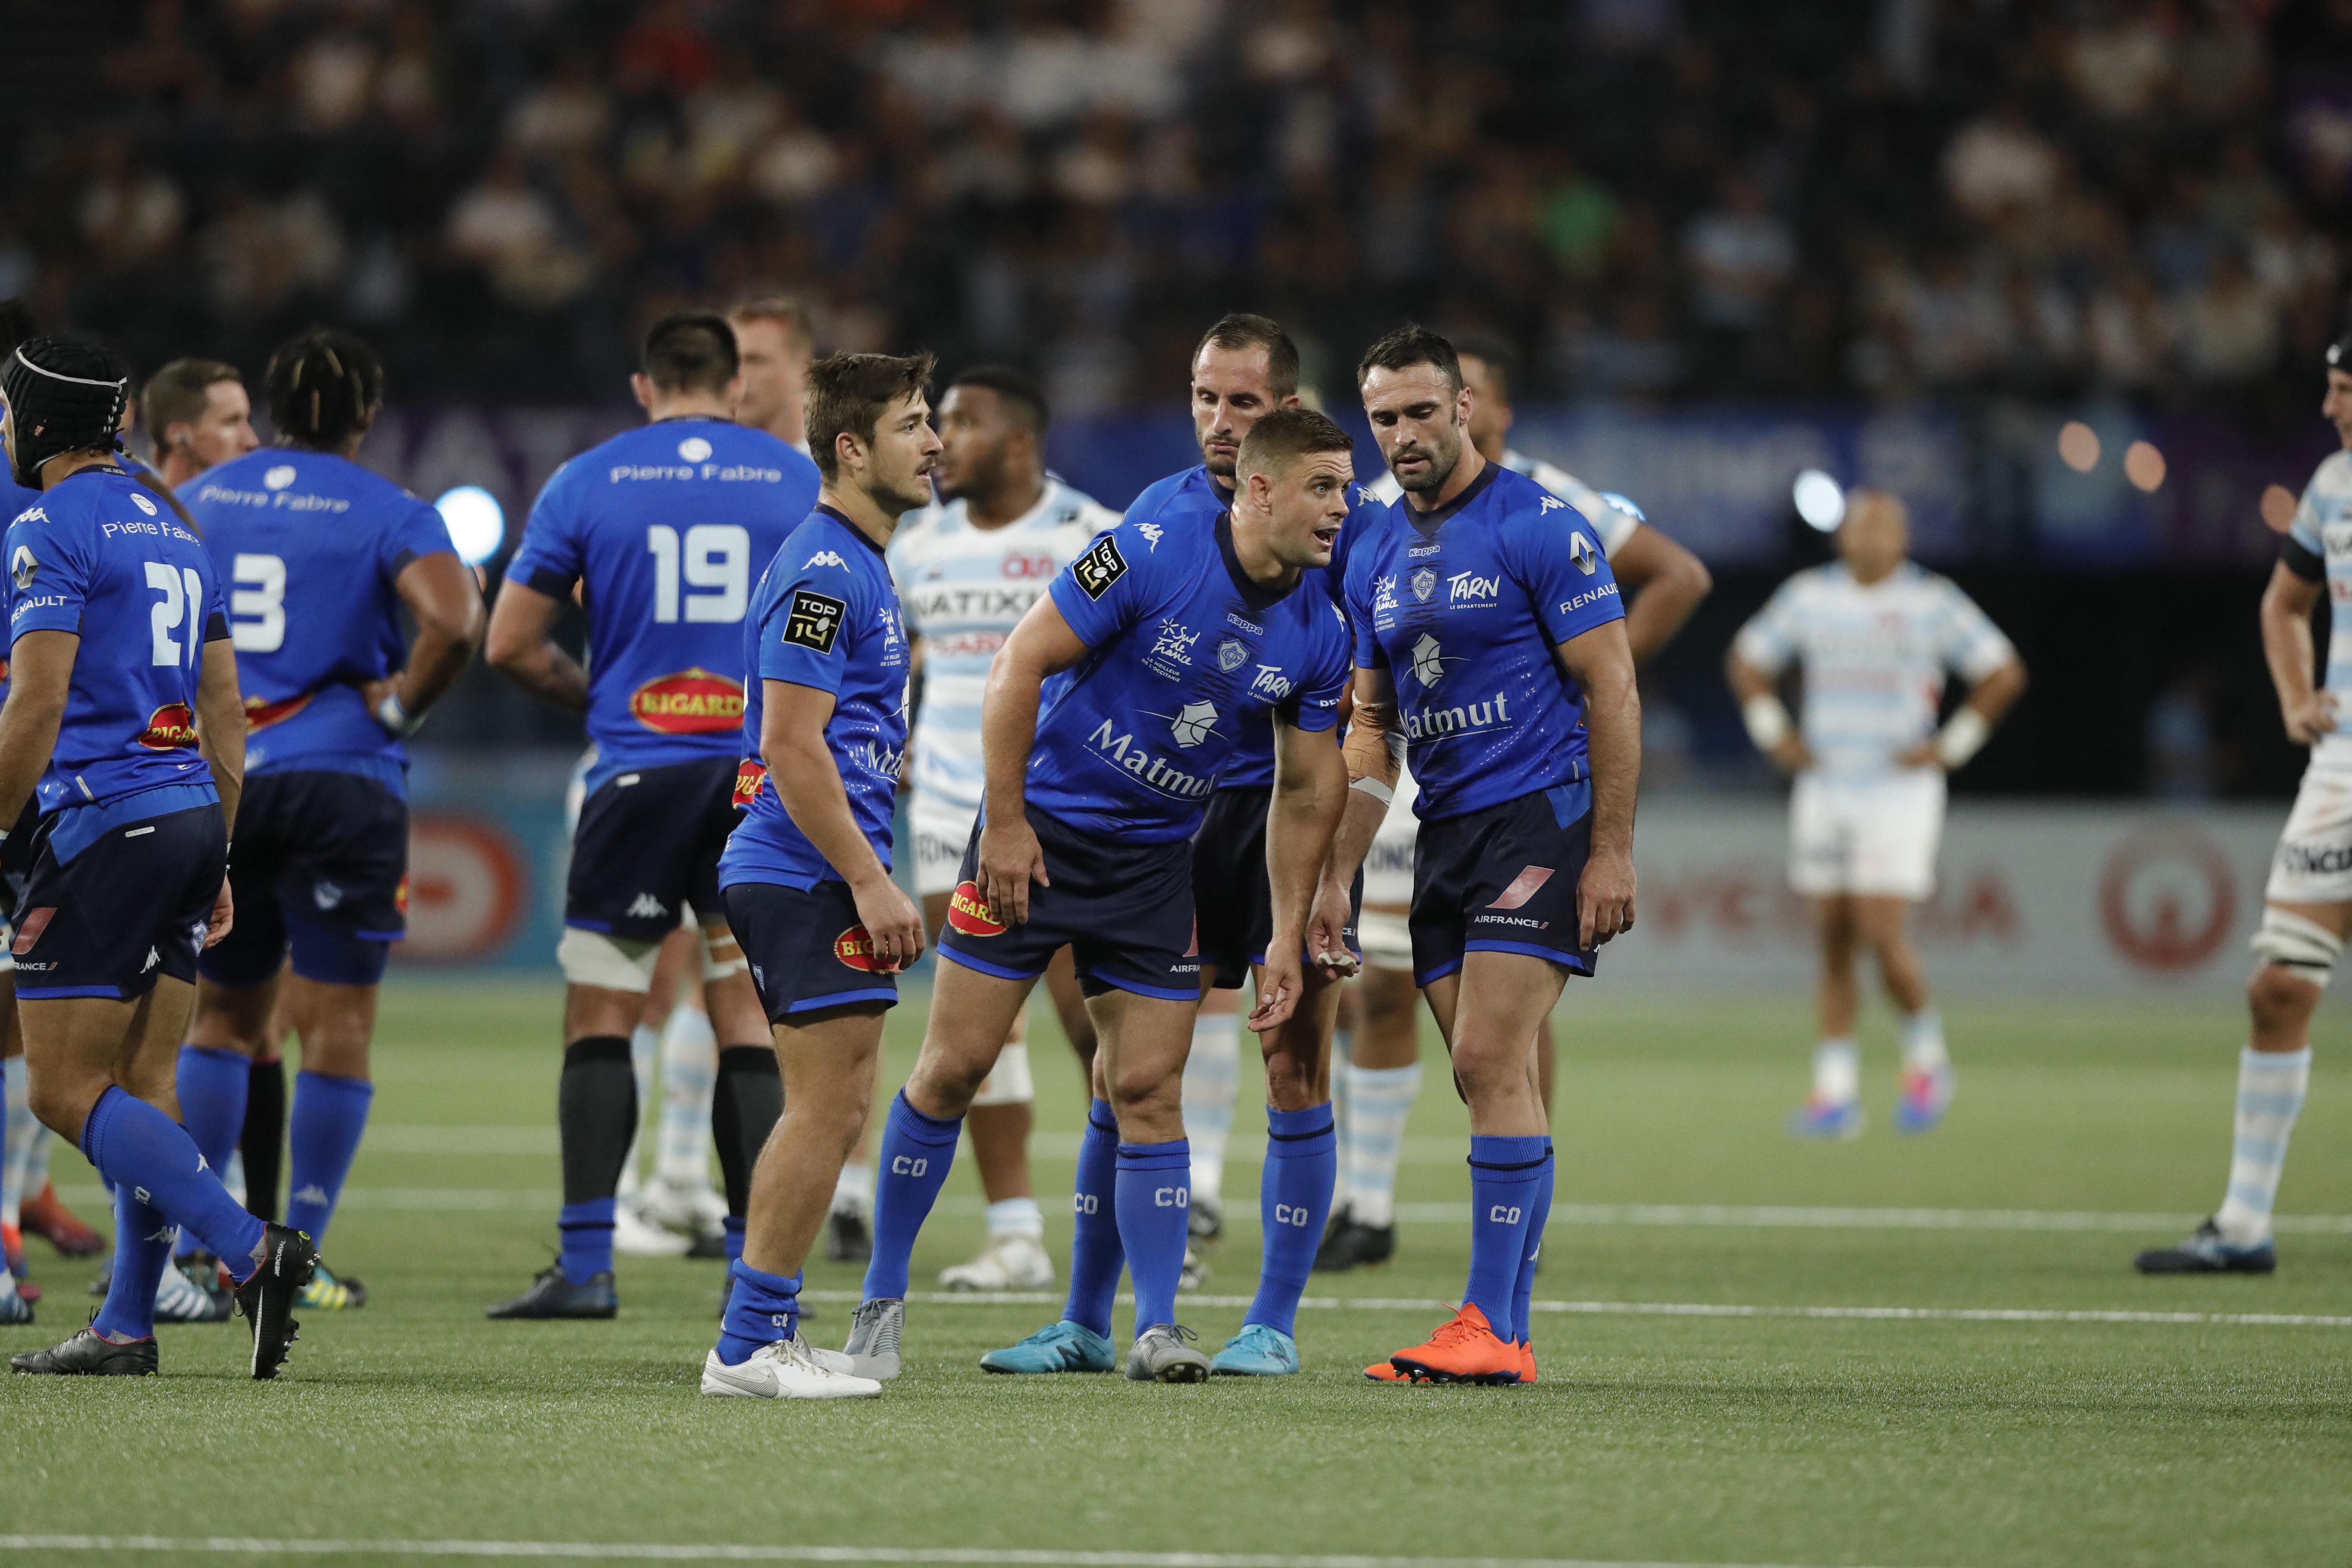 TOP 14 | CASTRES OLYMPIQUE - LOU RUGBY : 29-12